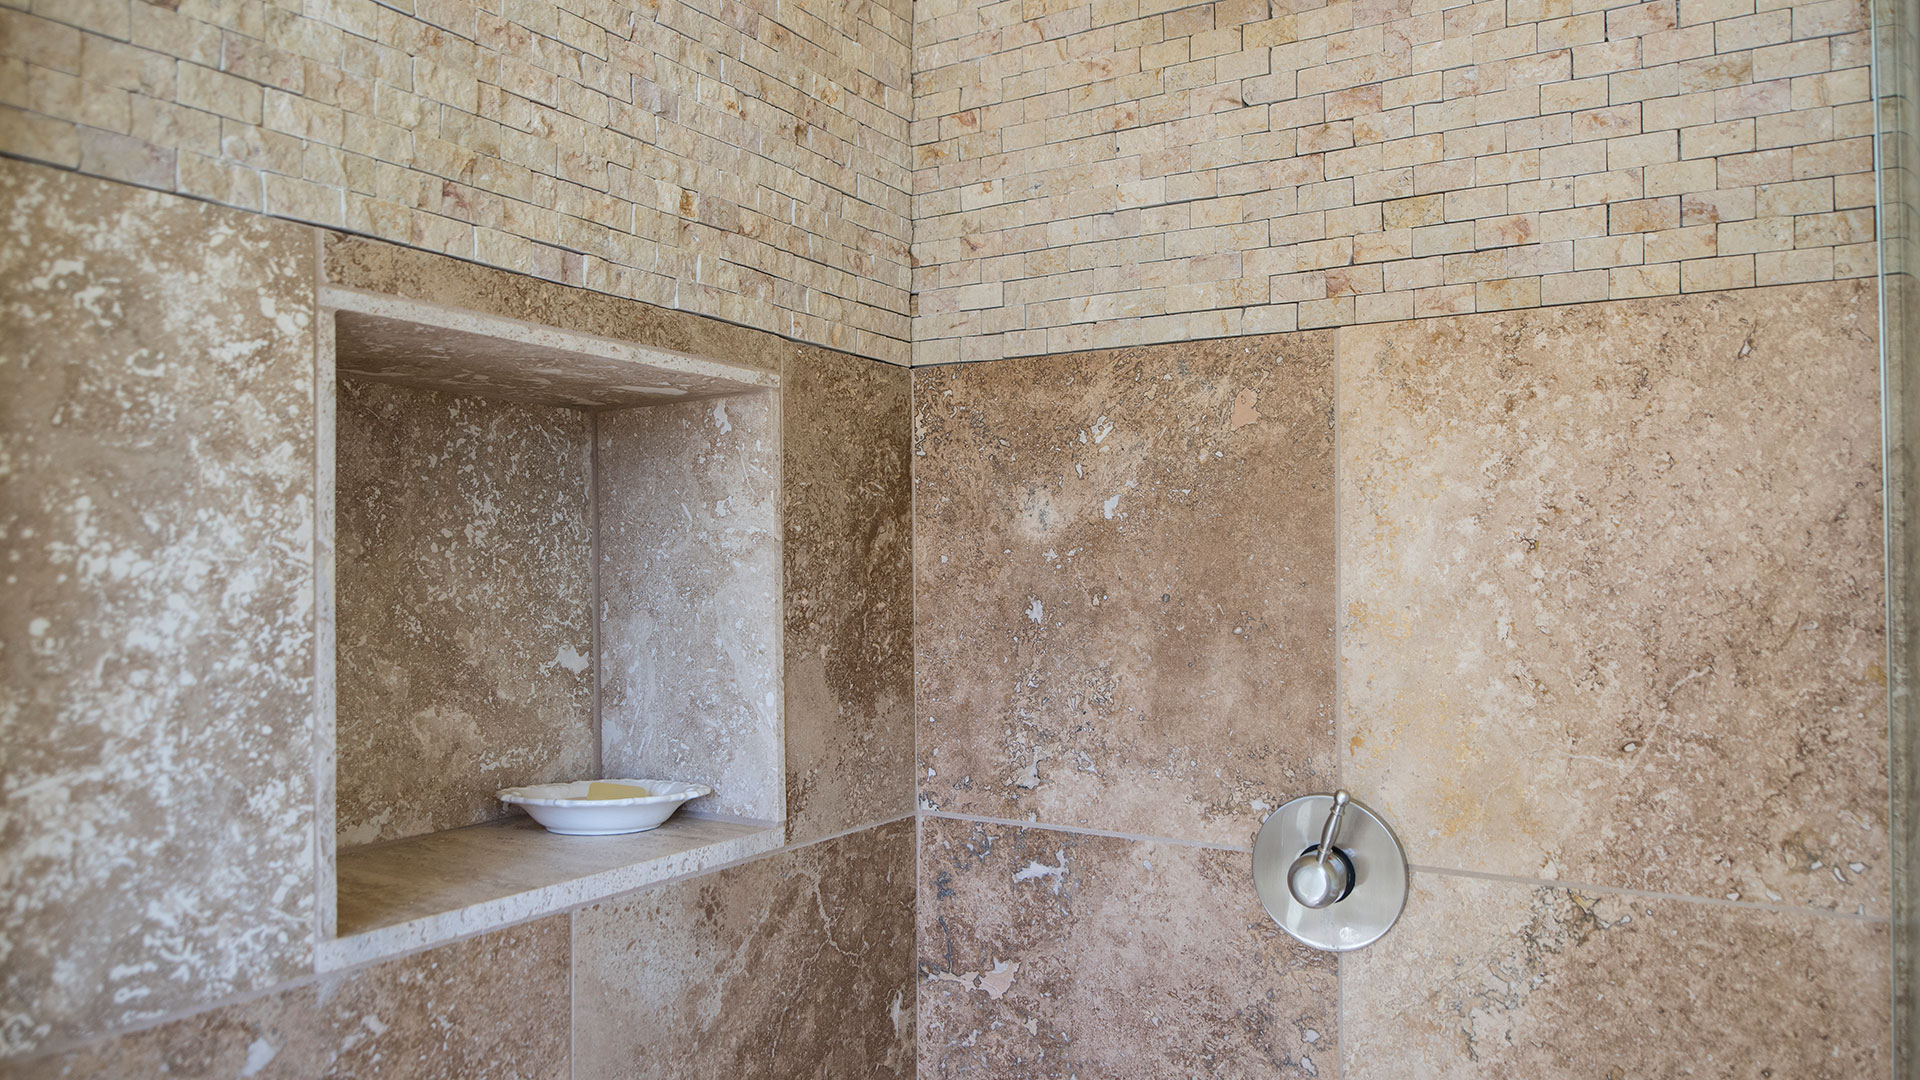 Interior shower with rustic stone tiles, metal valve, and a stone niche.